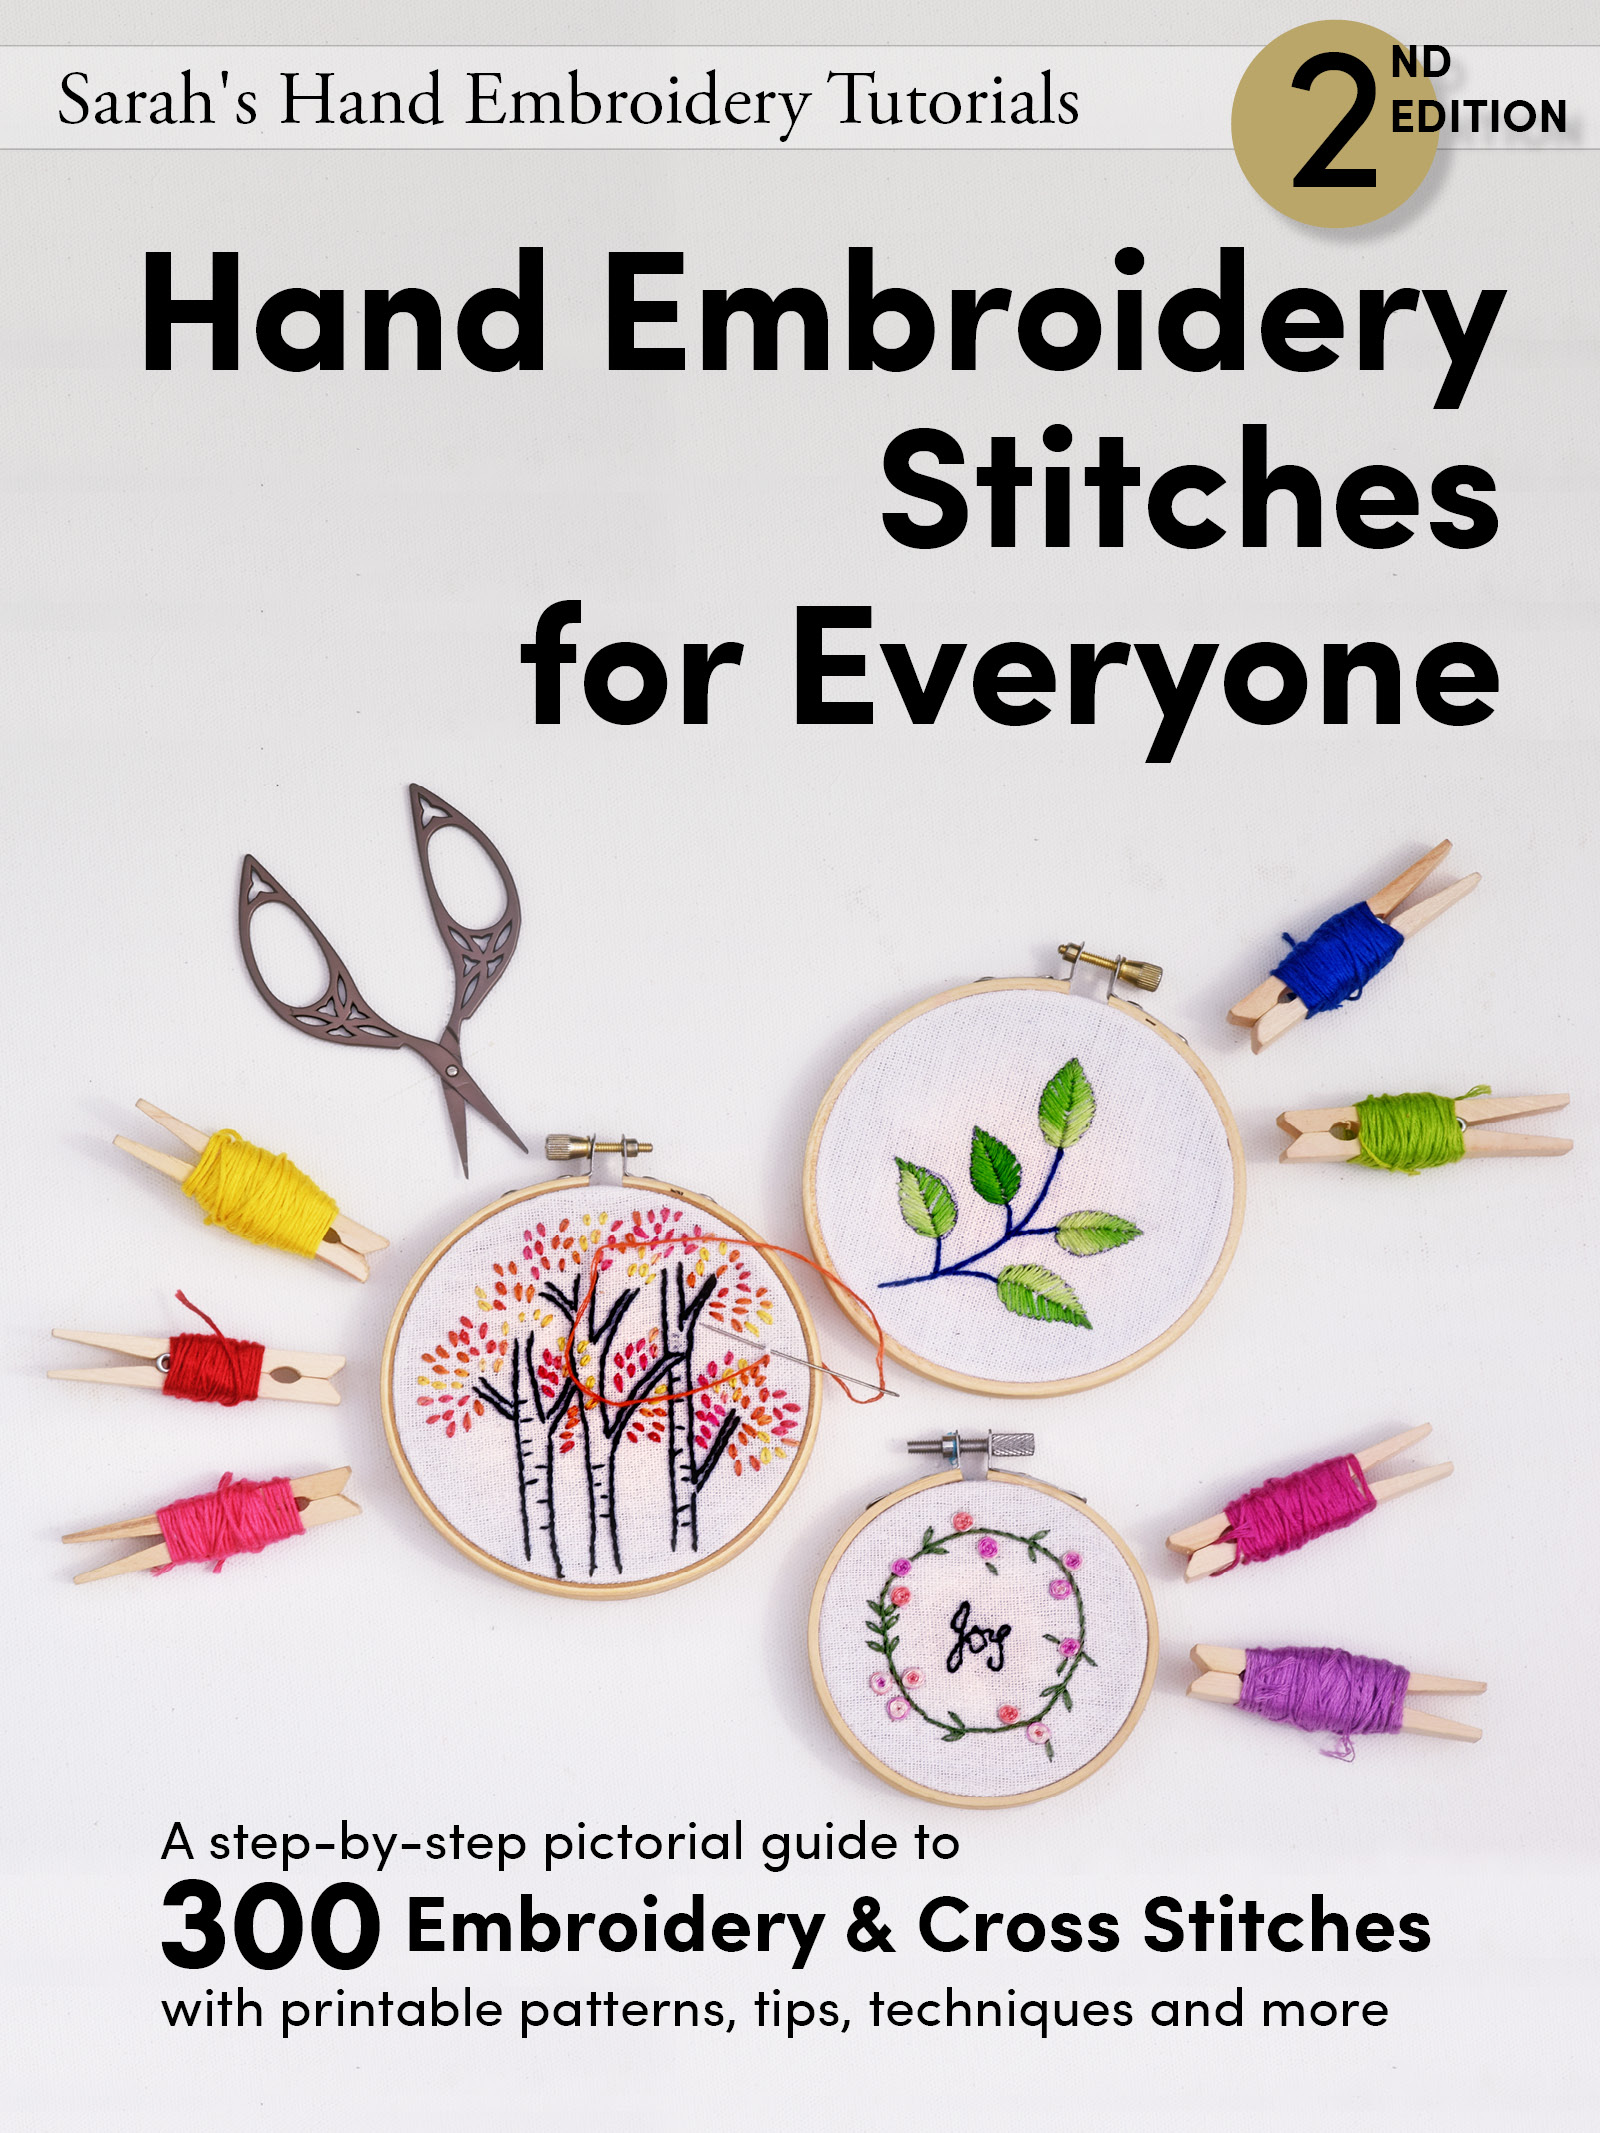 Hand Embroidery Stitches for Everyone, 2nd Edition